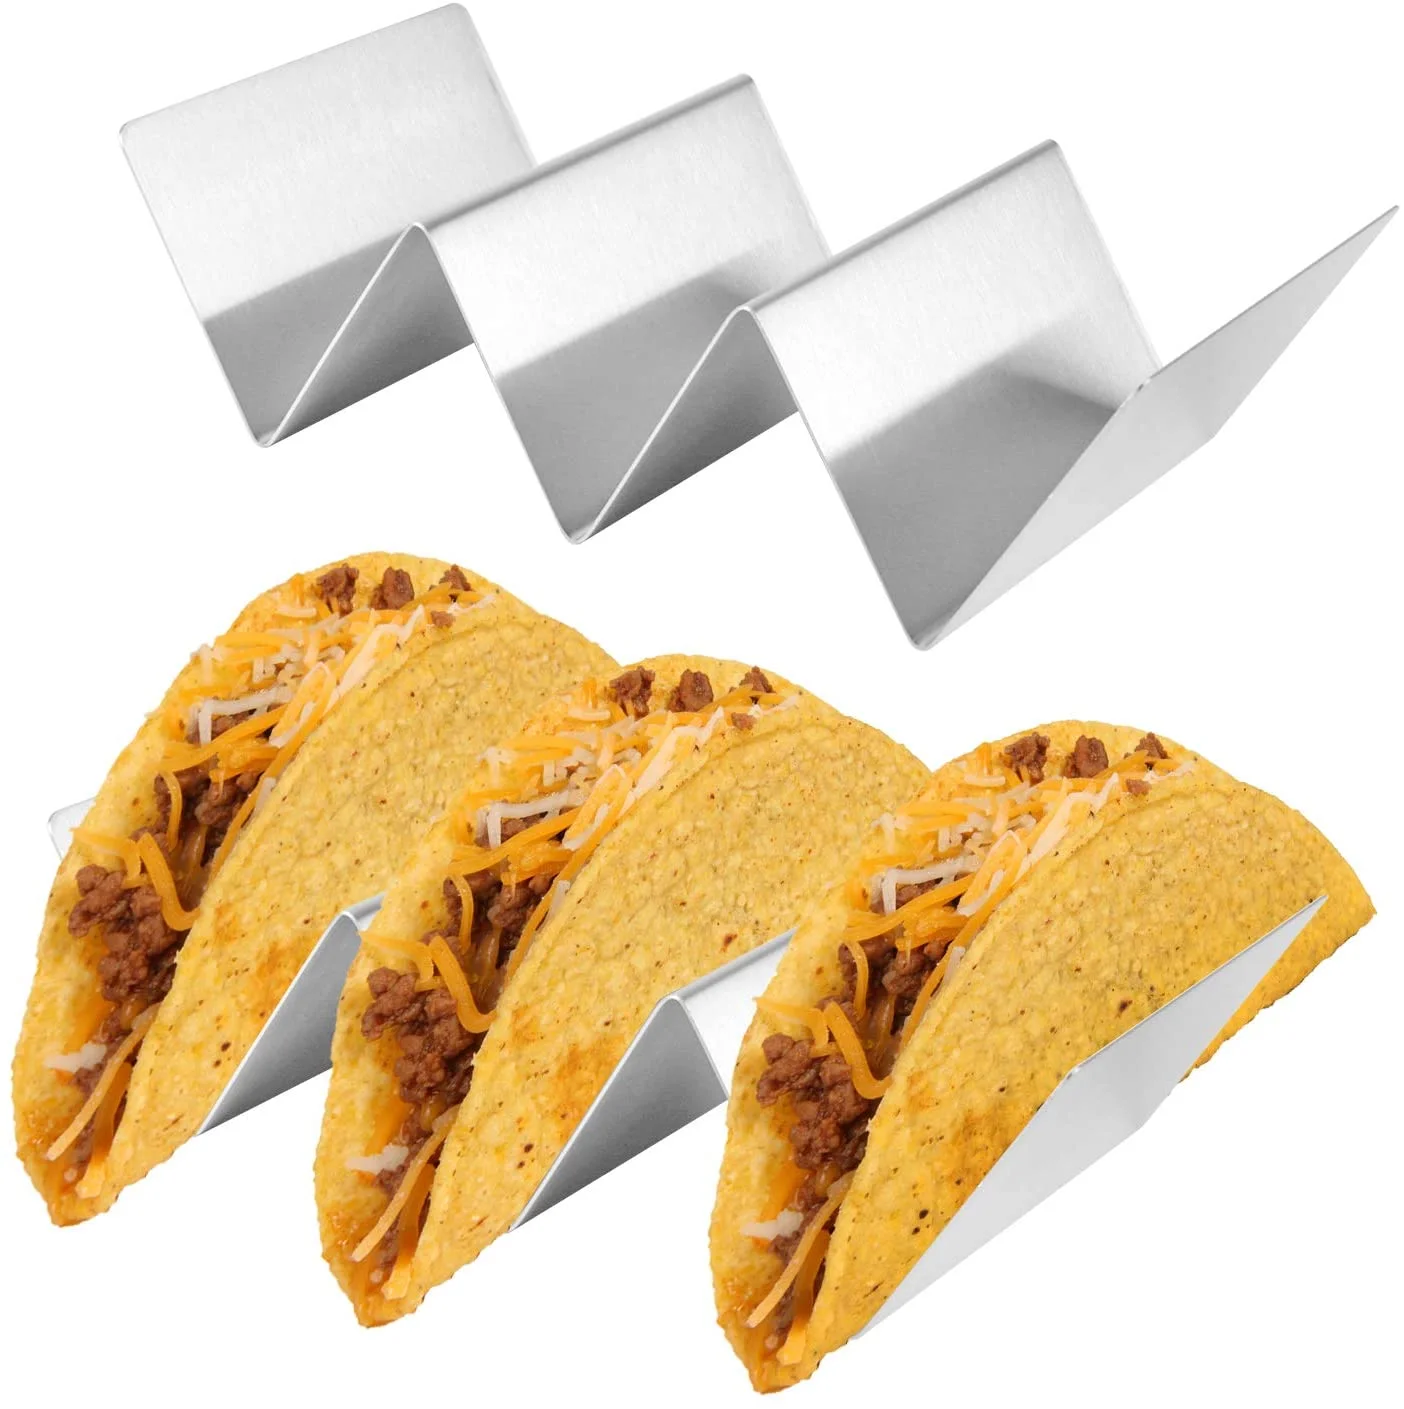 Food Grade Stainless Steel Taco Holder Stand Taco Truck Tray Style Oven Safe 